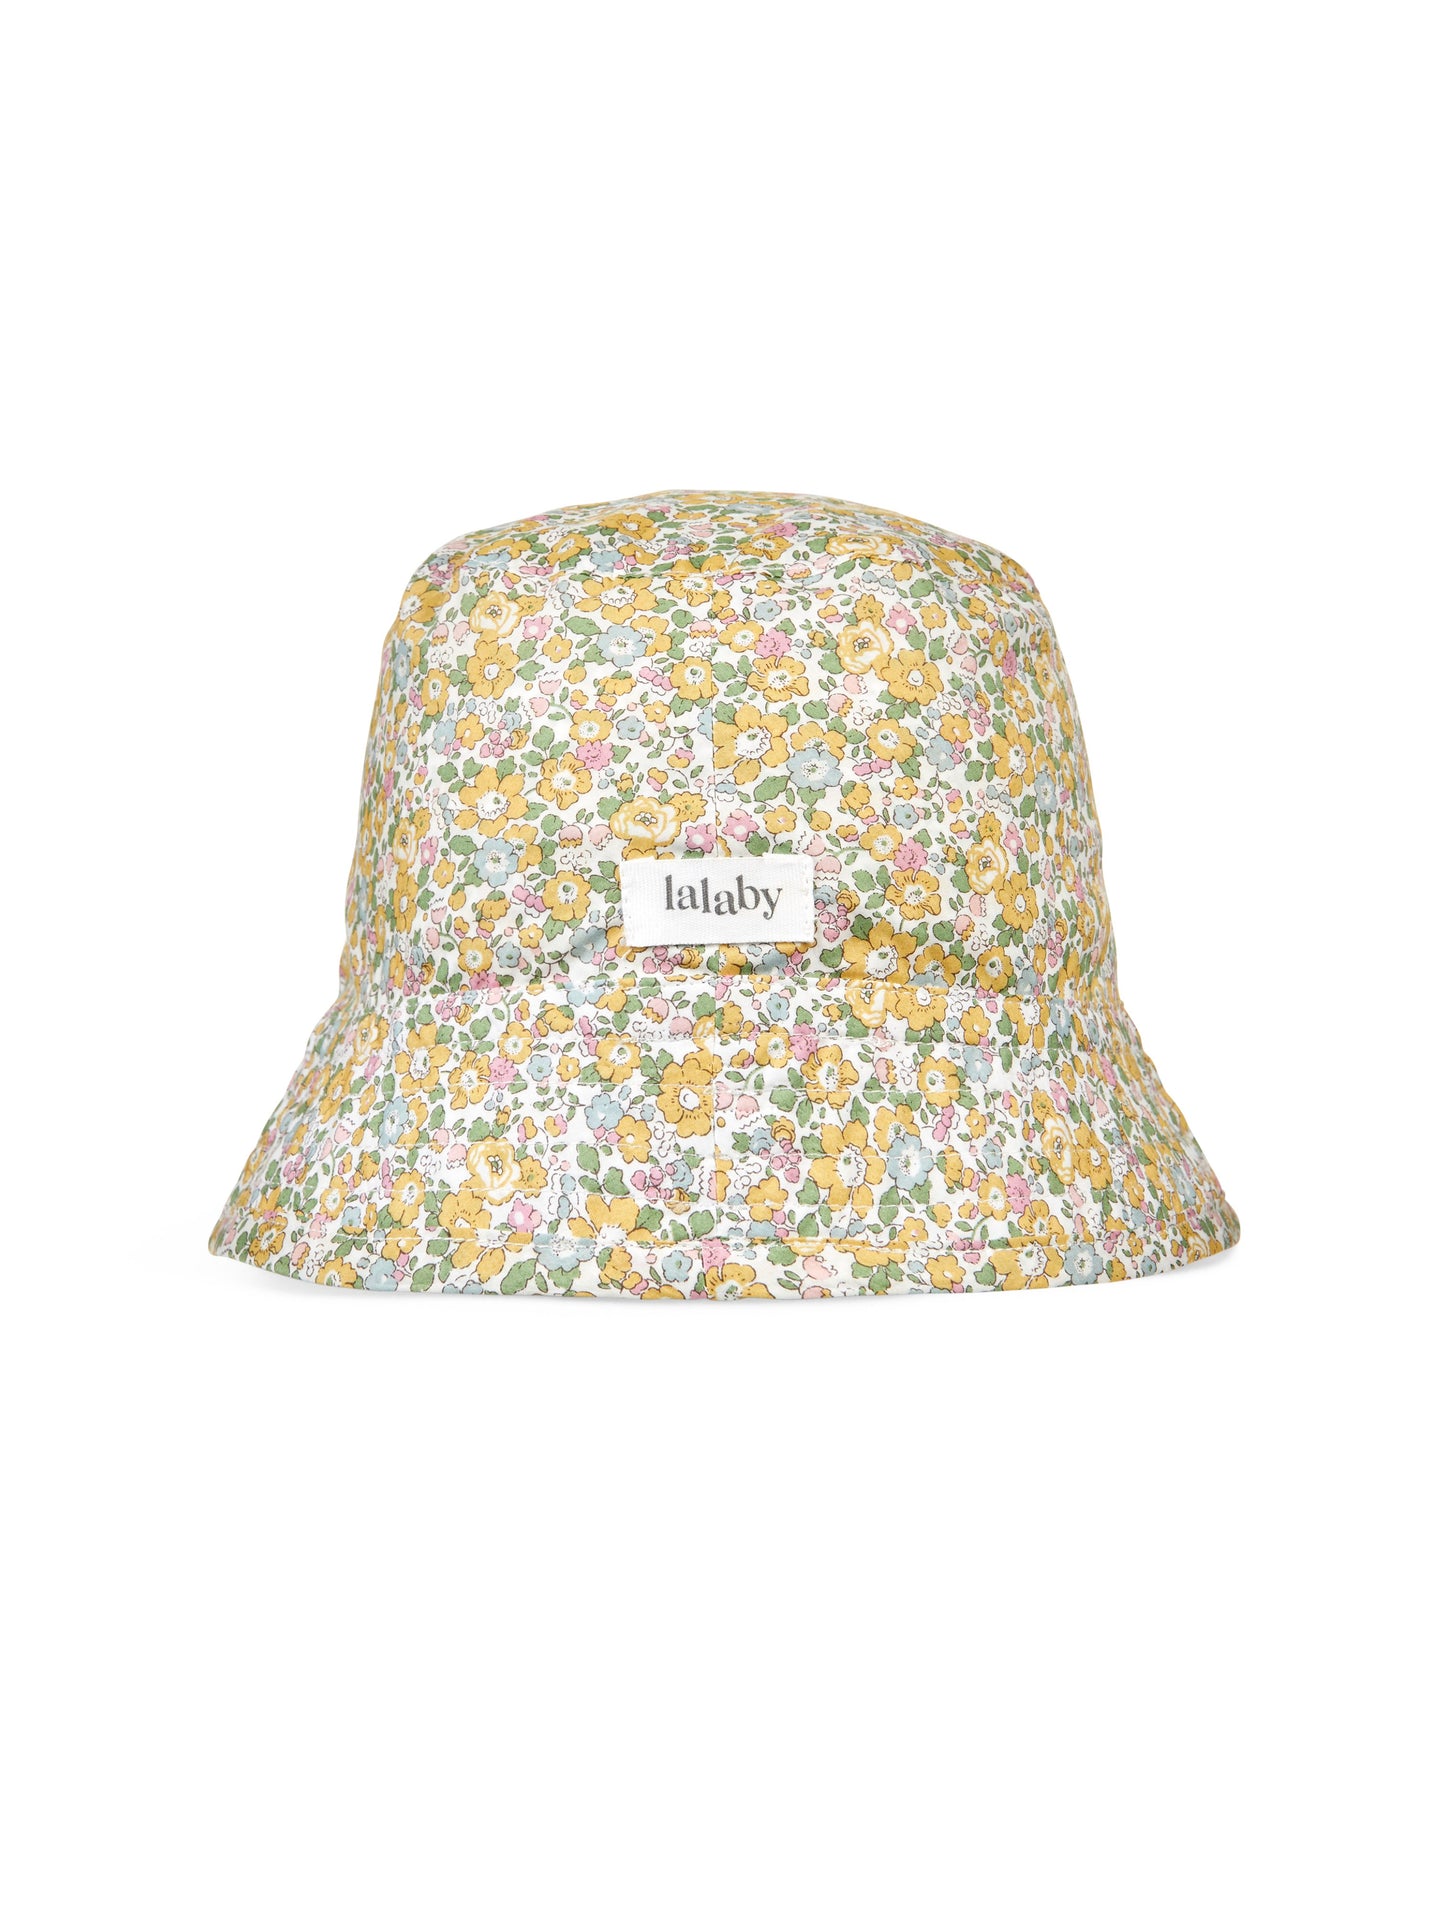 Lalaby - Loui hat - Liberty Betsy Ann